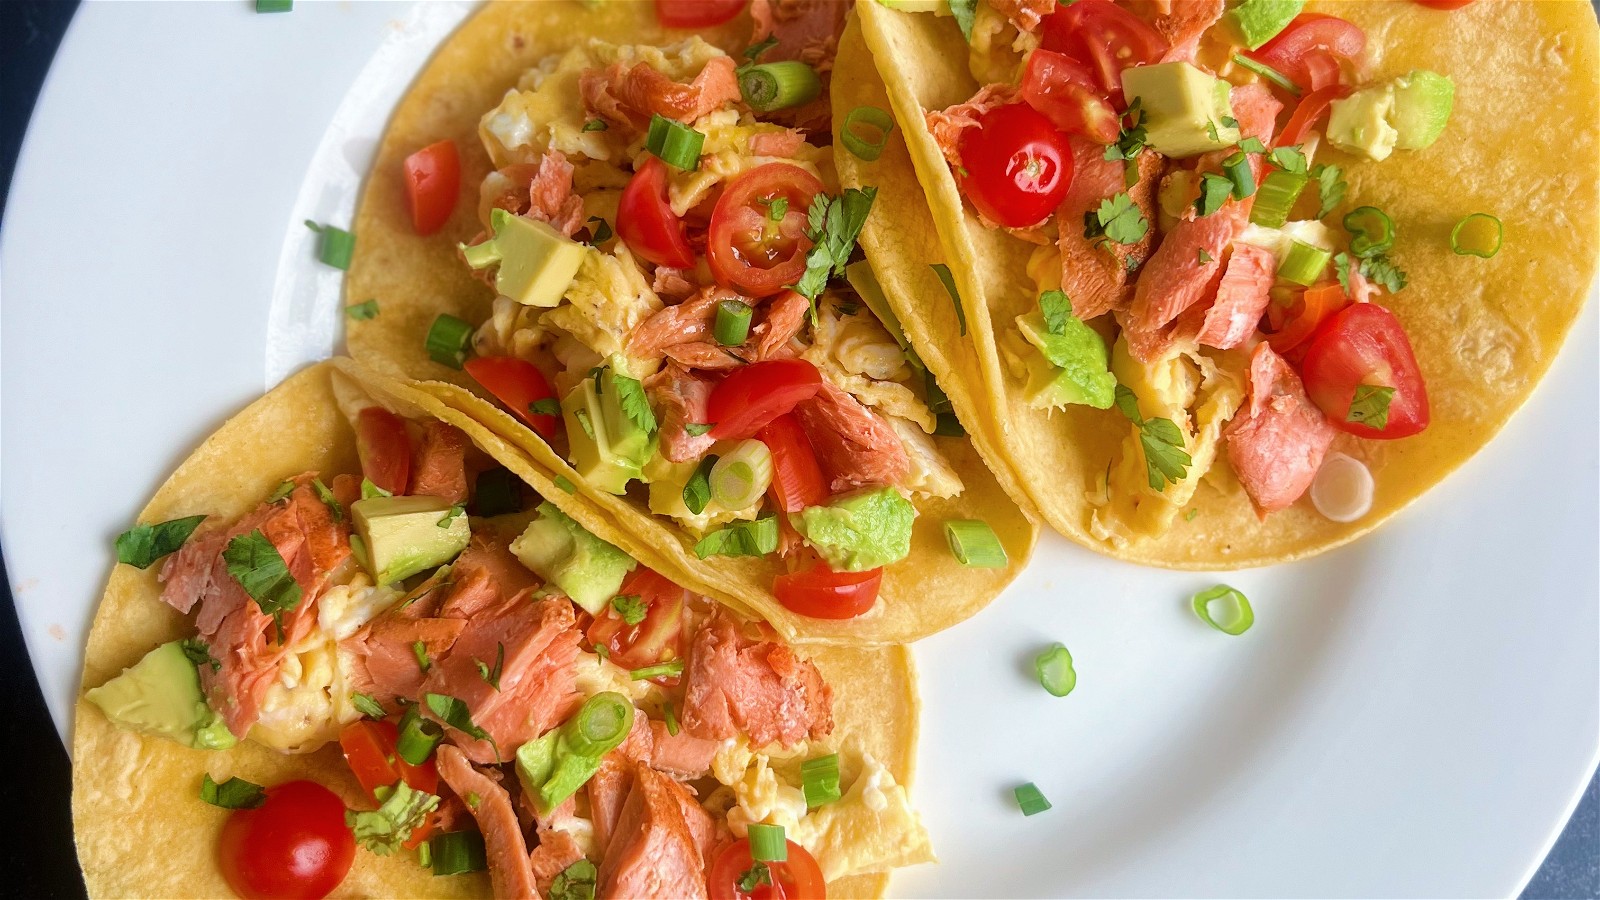 Image of Salmon, Egg, and Avocado Breakfast Tacos